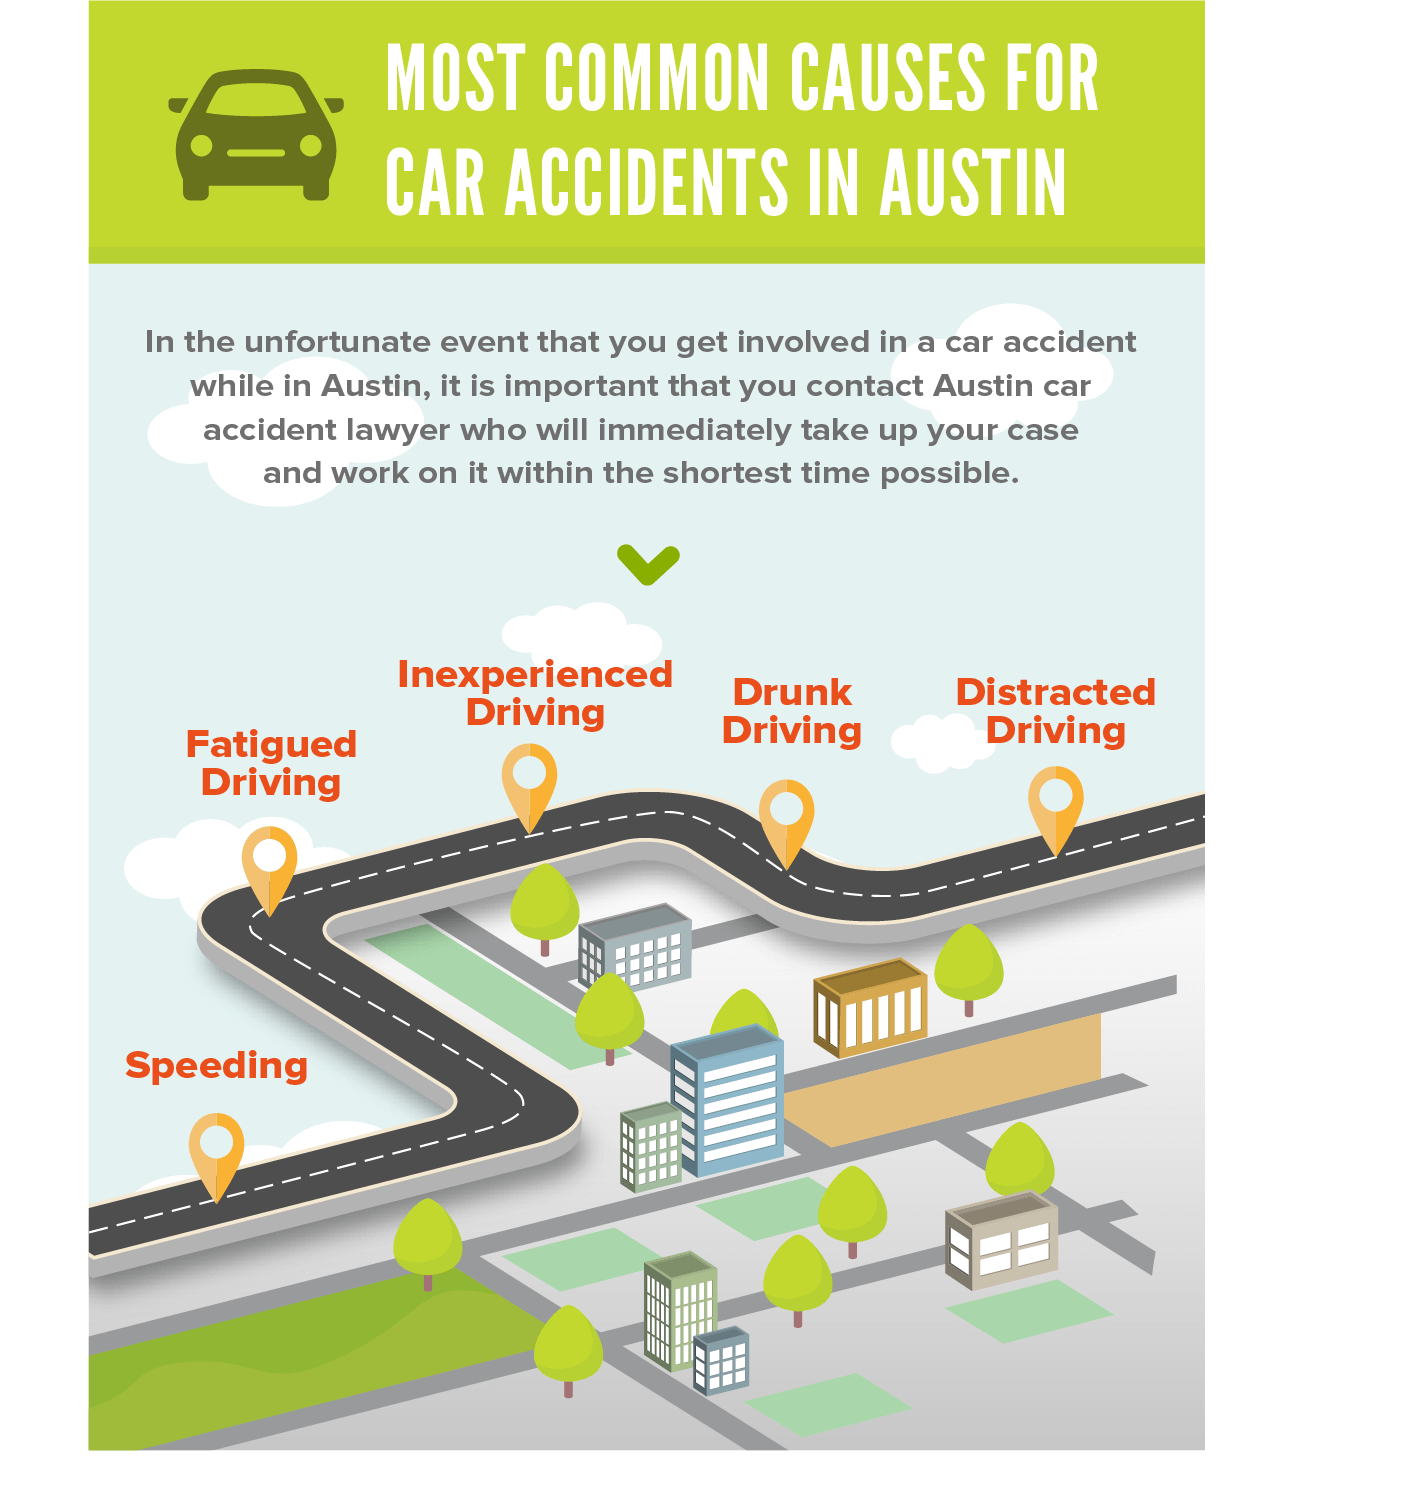 Infographic of the most common causes for a car accident which include speeding, fatigue, inexperienced driving, drunk driving, and distracted driving.